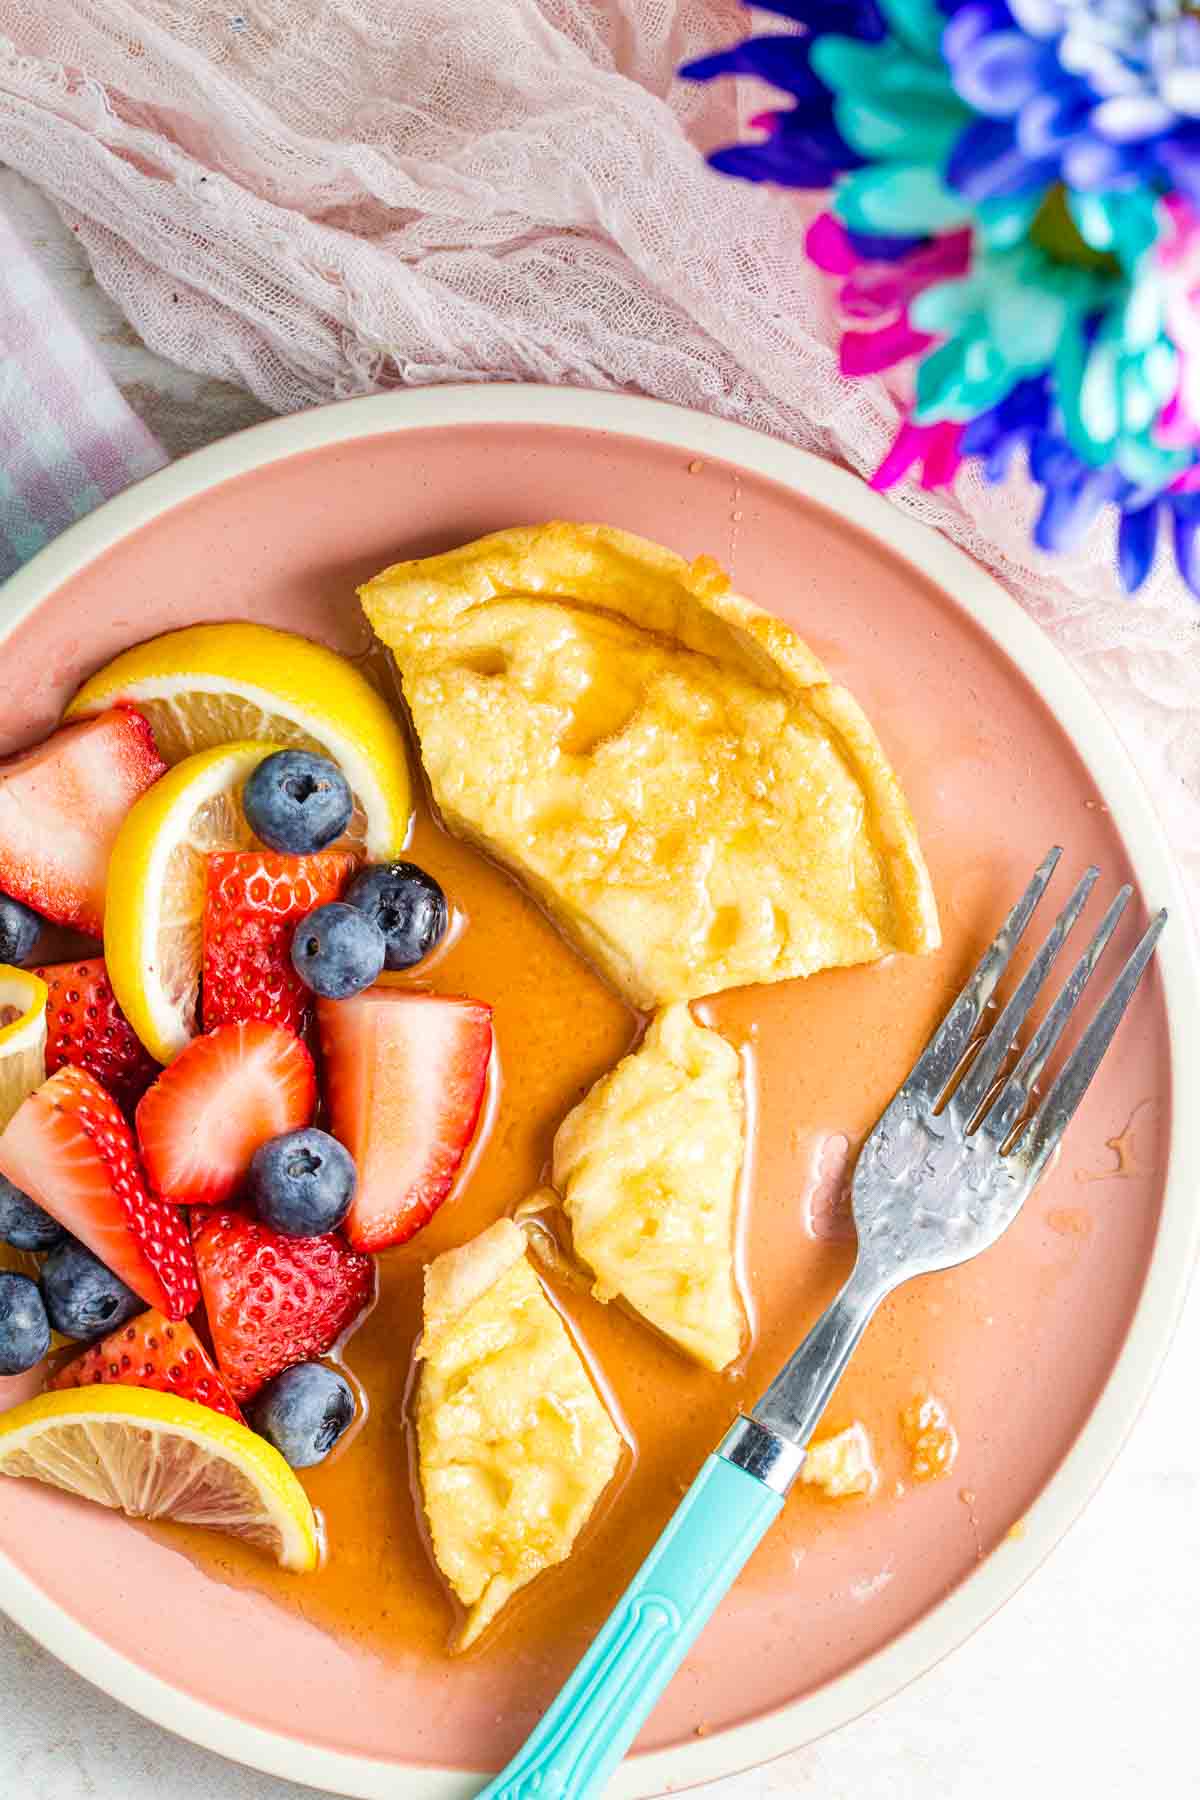 Fruit and German pancakes are served on a pink plate with a fork.